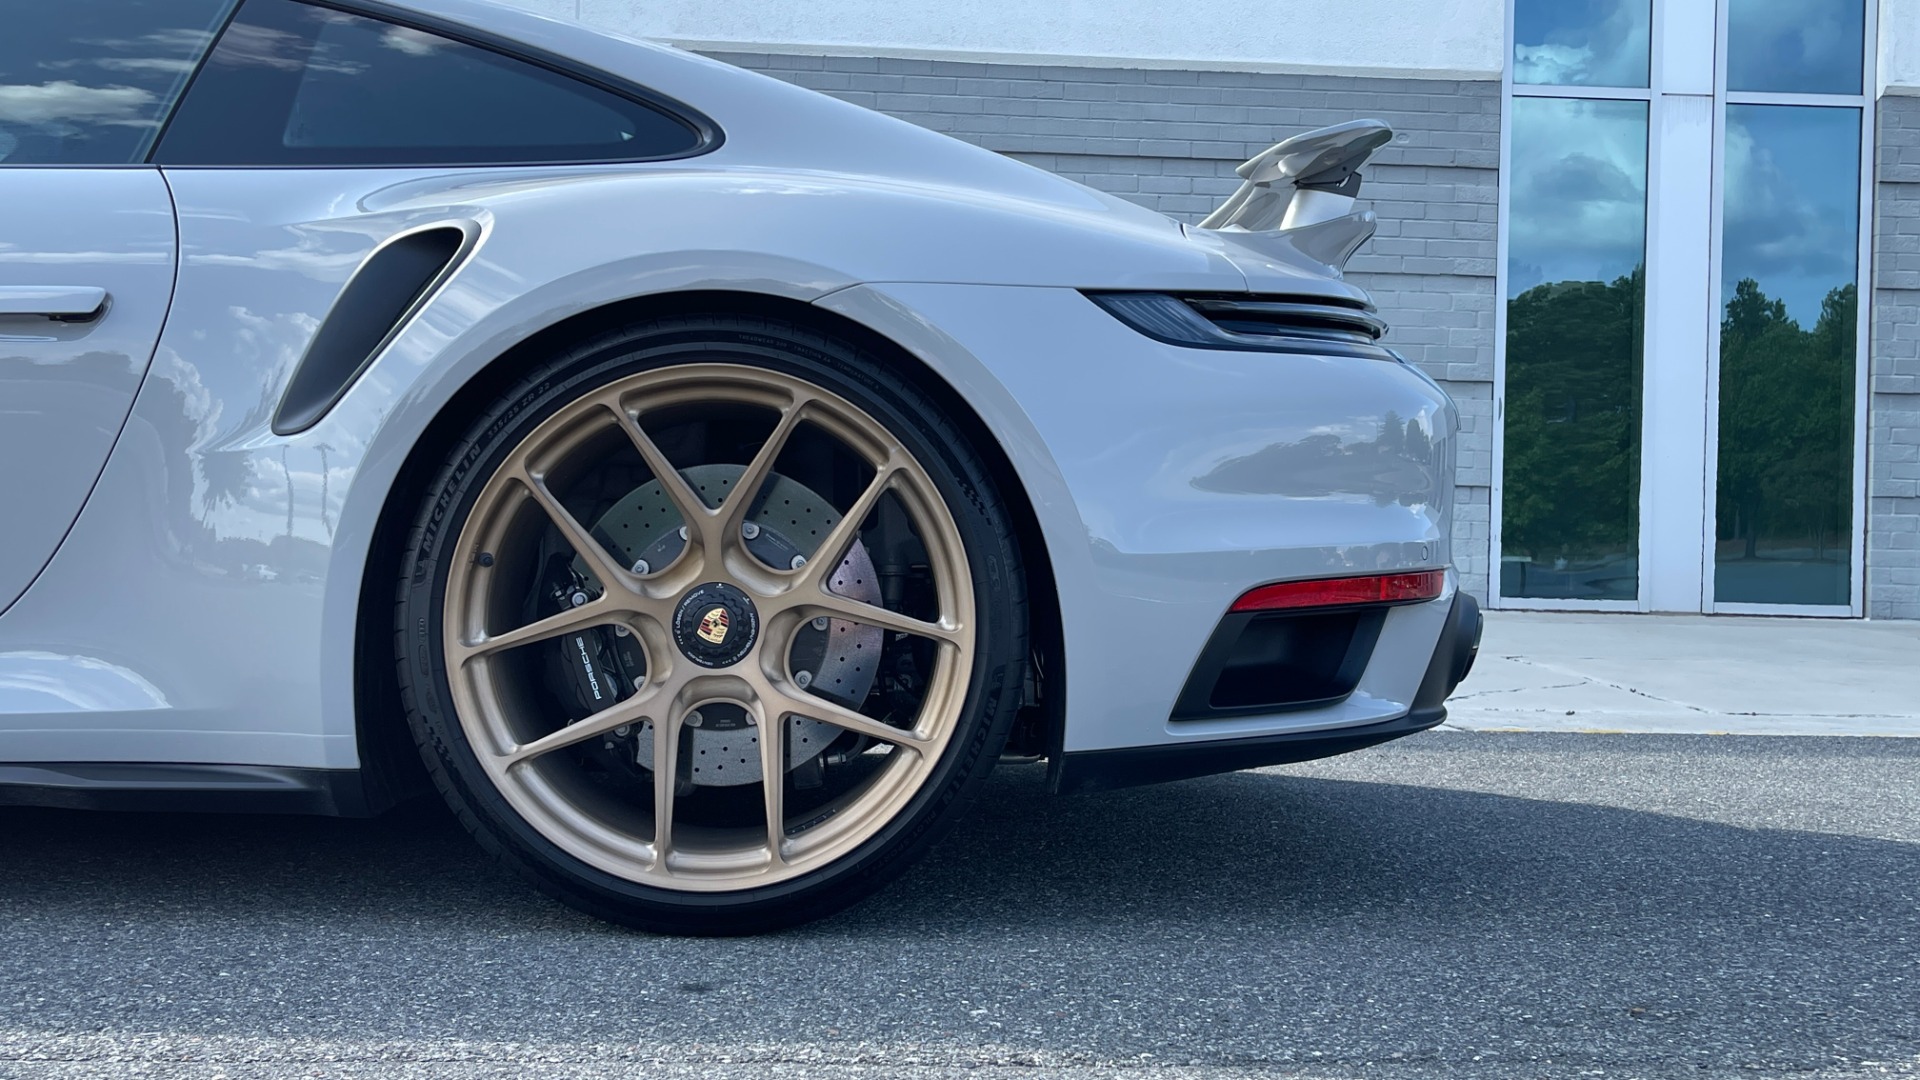 Used 2021 Porsche 911 Turbo S / HRE WHEELS / FRONT LIFT / MATRIX LIGHTS / PASM SUSPENSION for sale $299,000 at Formula Imports in Charlotte NC 28227 67